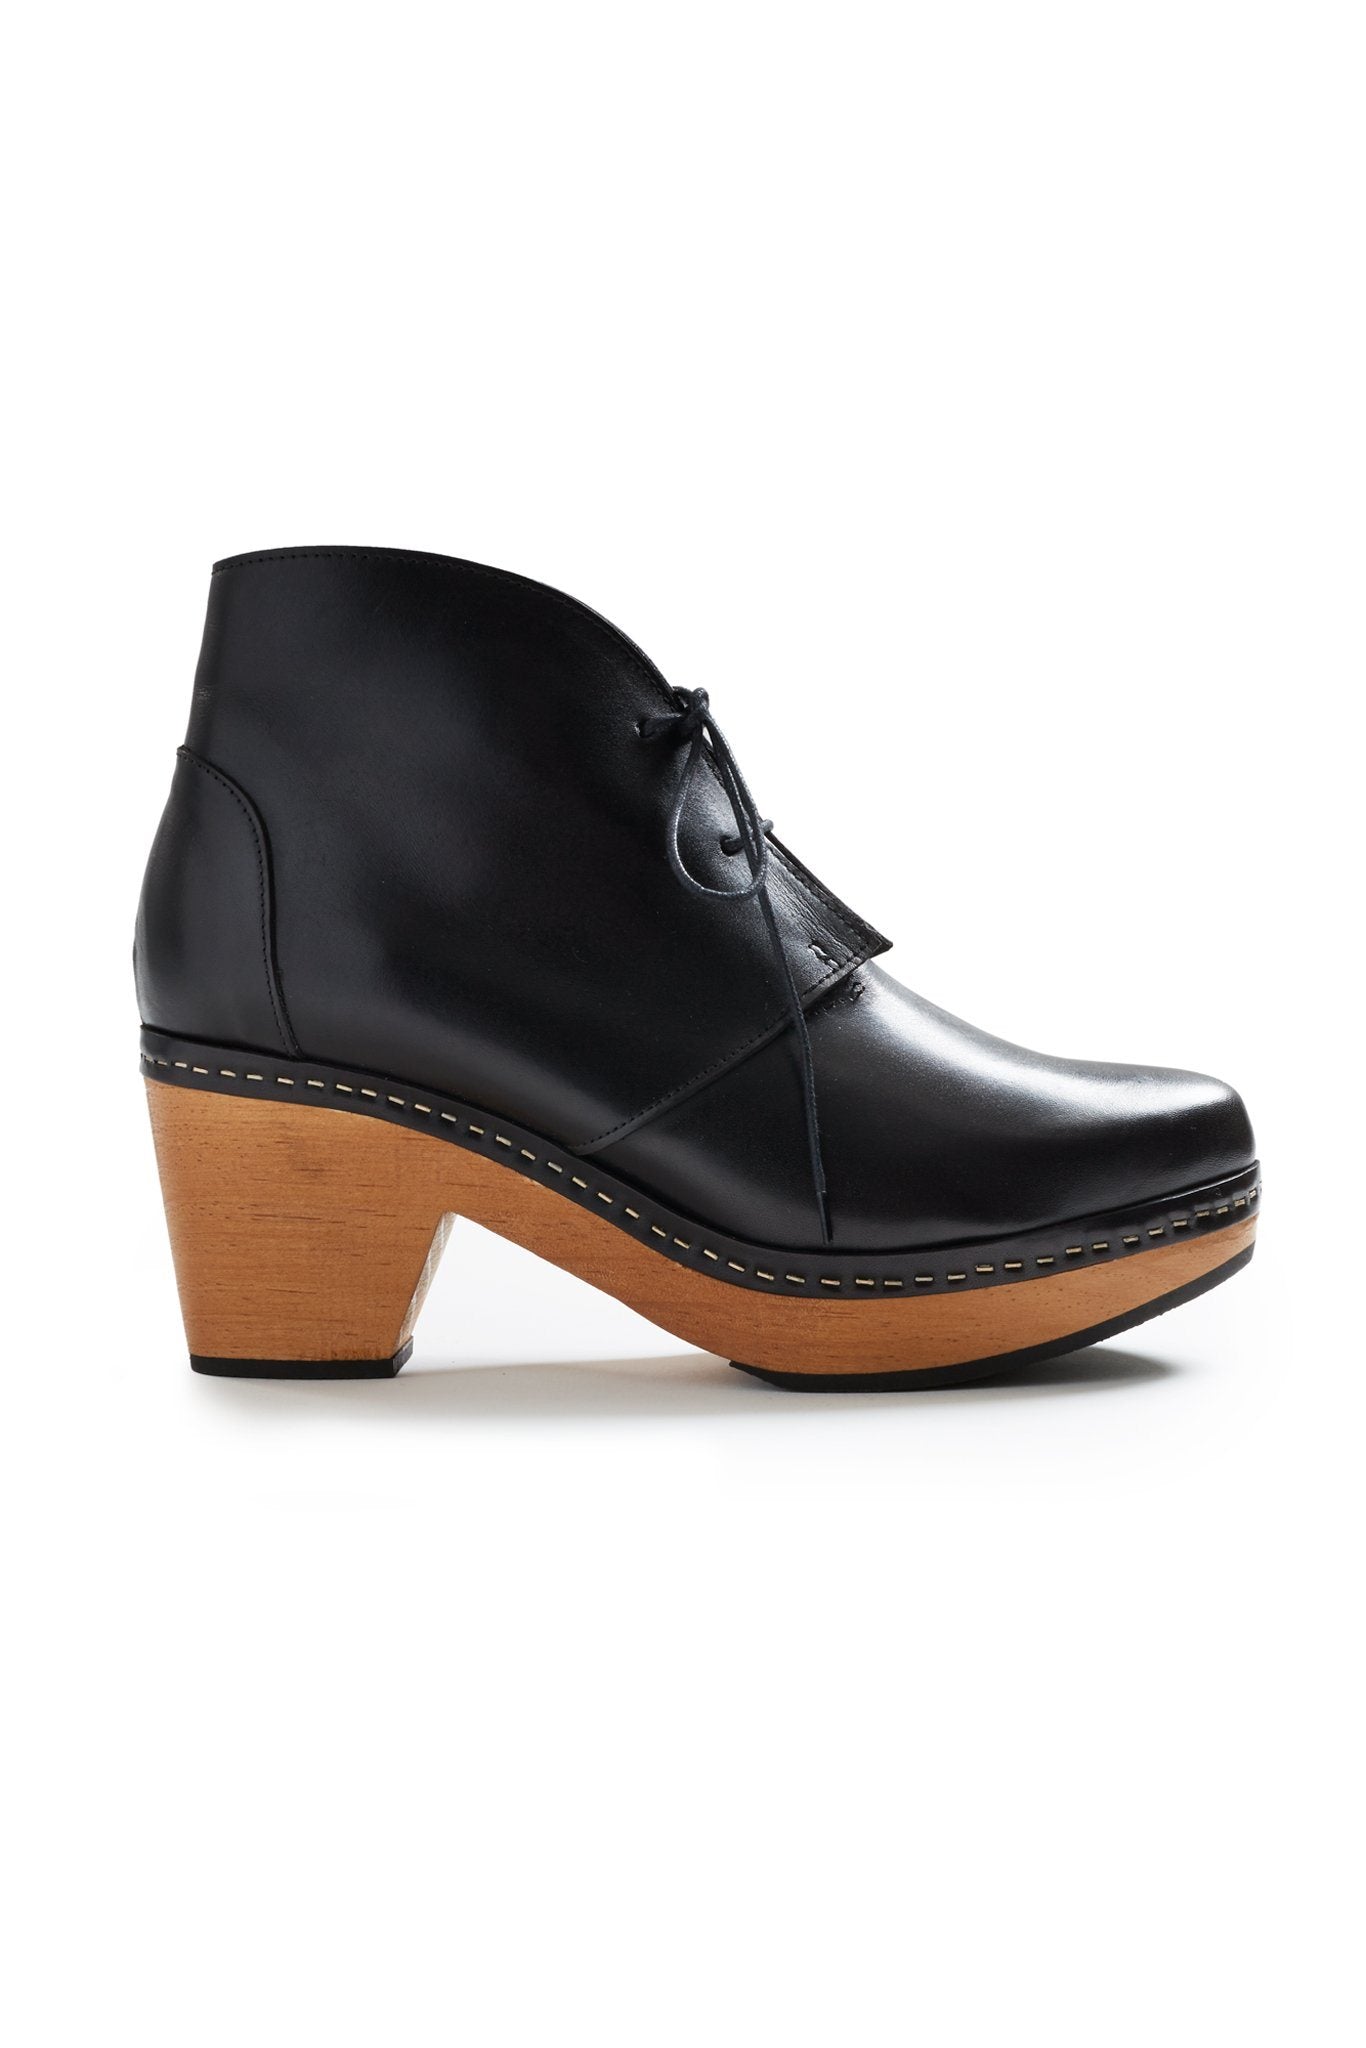 smooth toe leather bootie clogs in black Clogs lisa b. black 36 (US 5.5-6) 